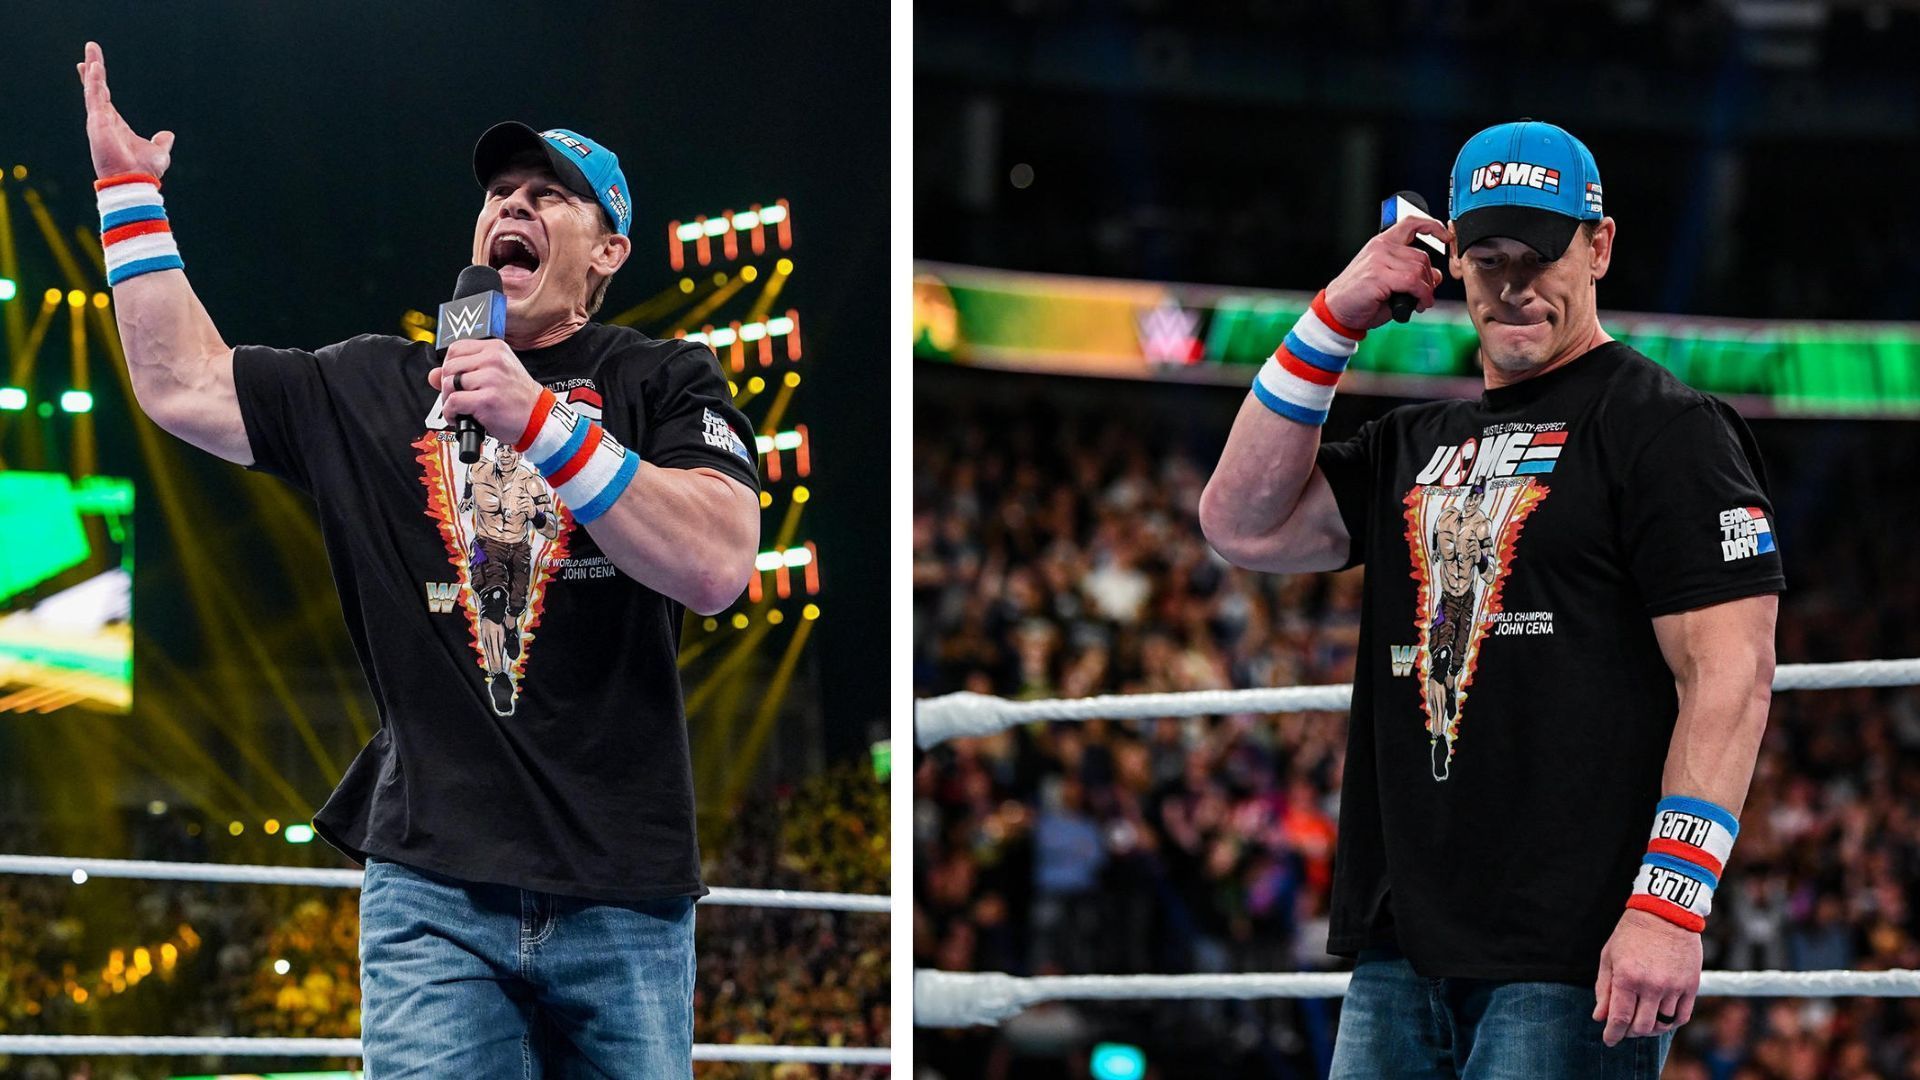 John Cena is nearing the end of his illustrious career.